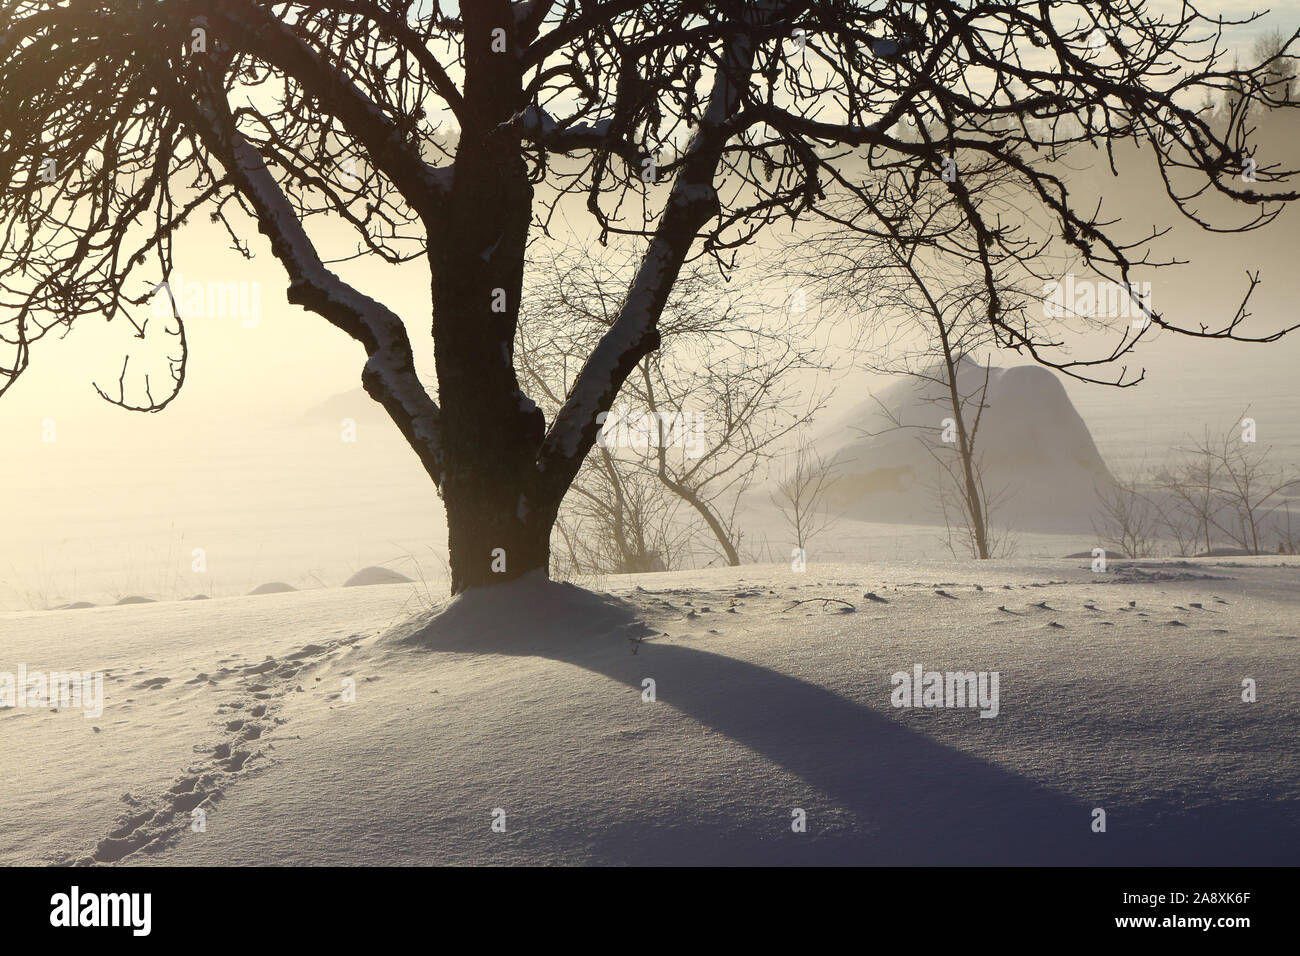 Silhouette of a chestnut tree standing alone in the snow surrounded by chilly fog. Stock Photo